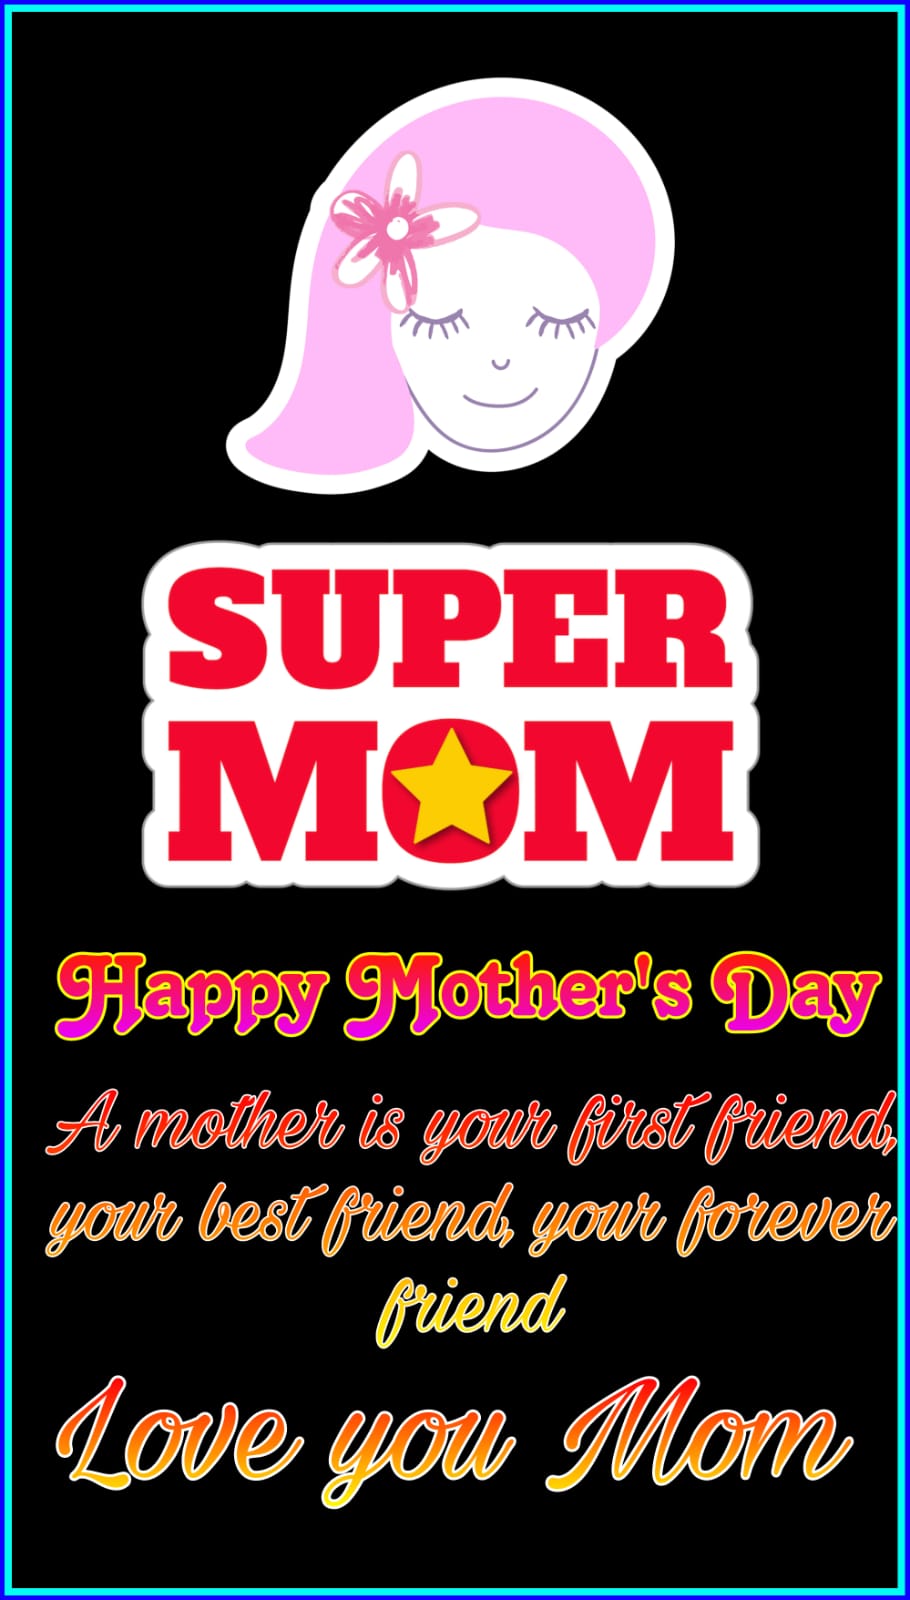 Happy Mother's Day image